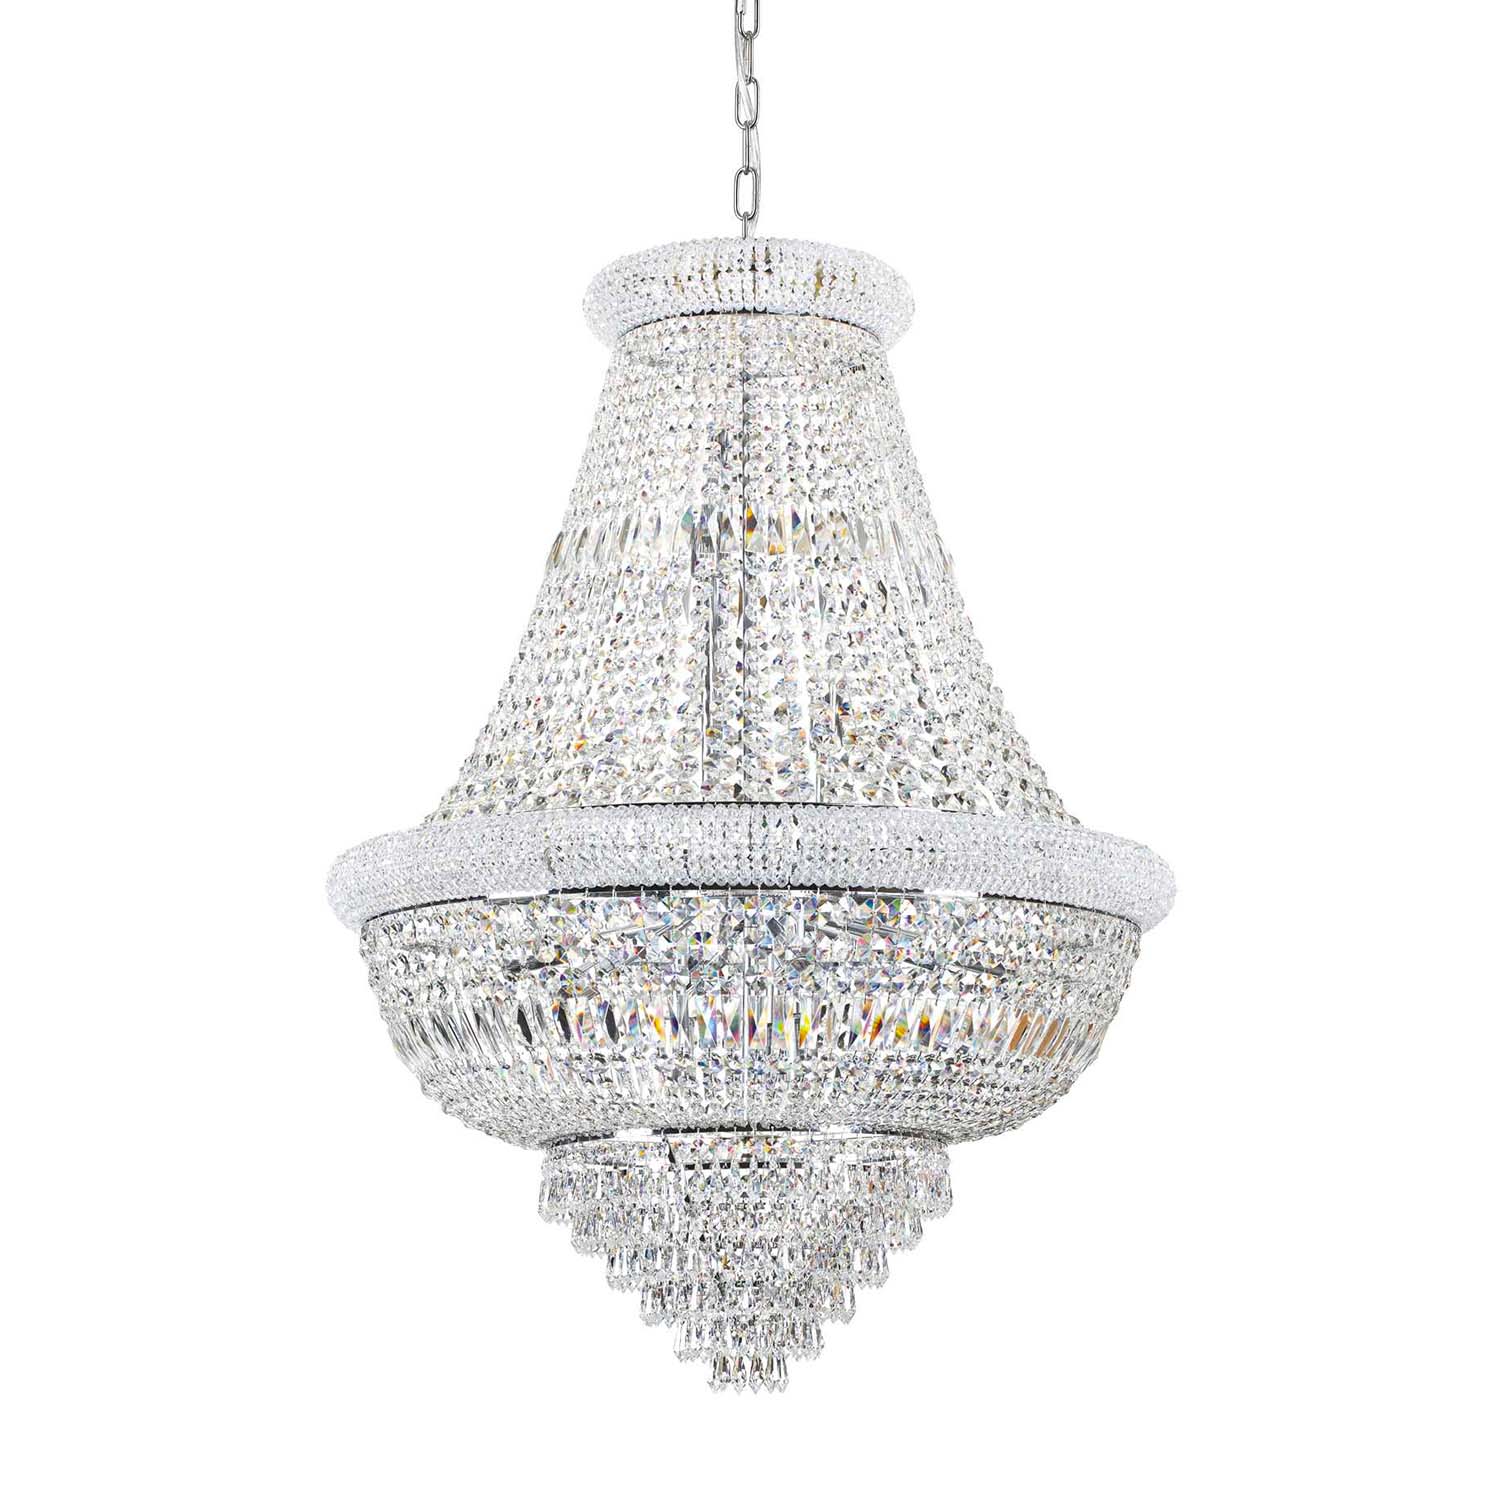 DUBAI - Chic chandelier in glass beads and crystal